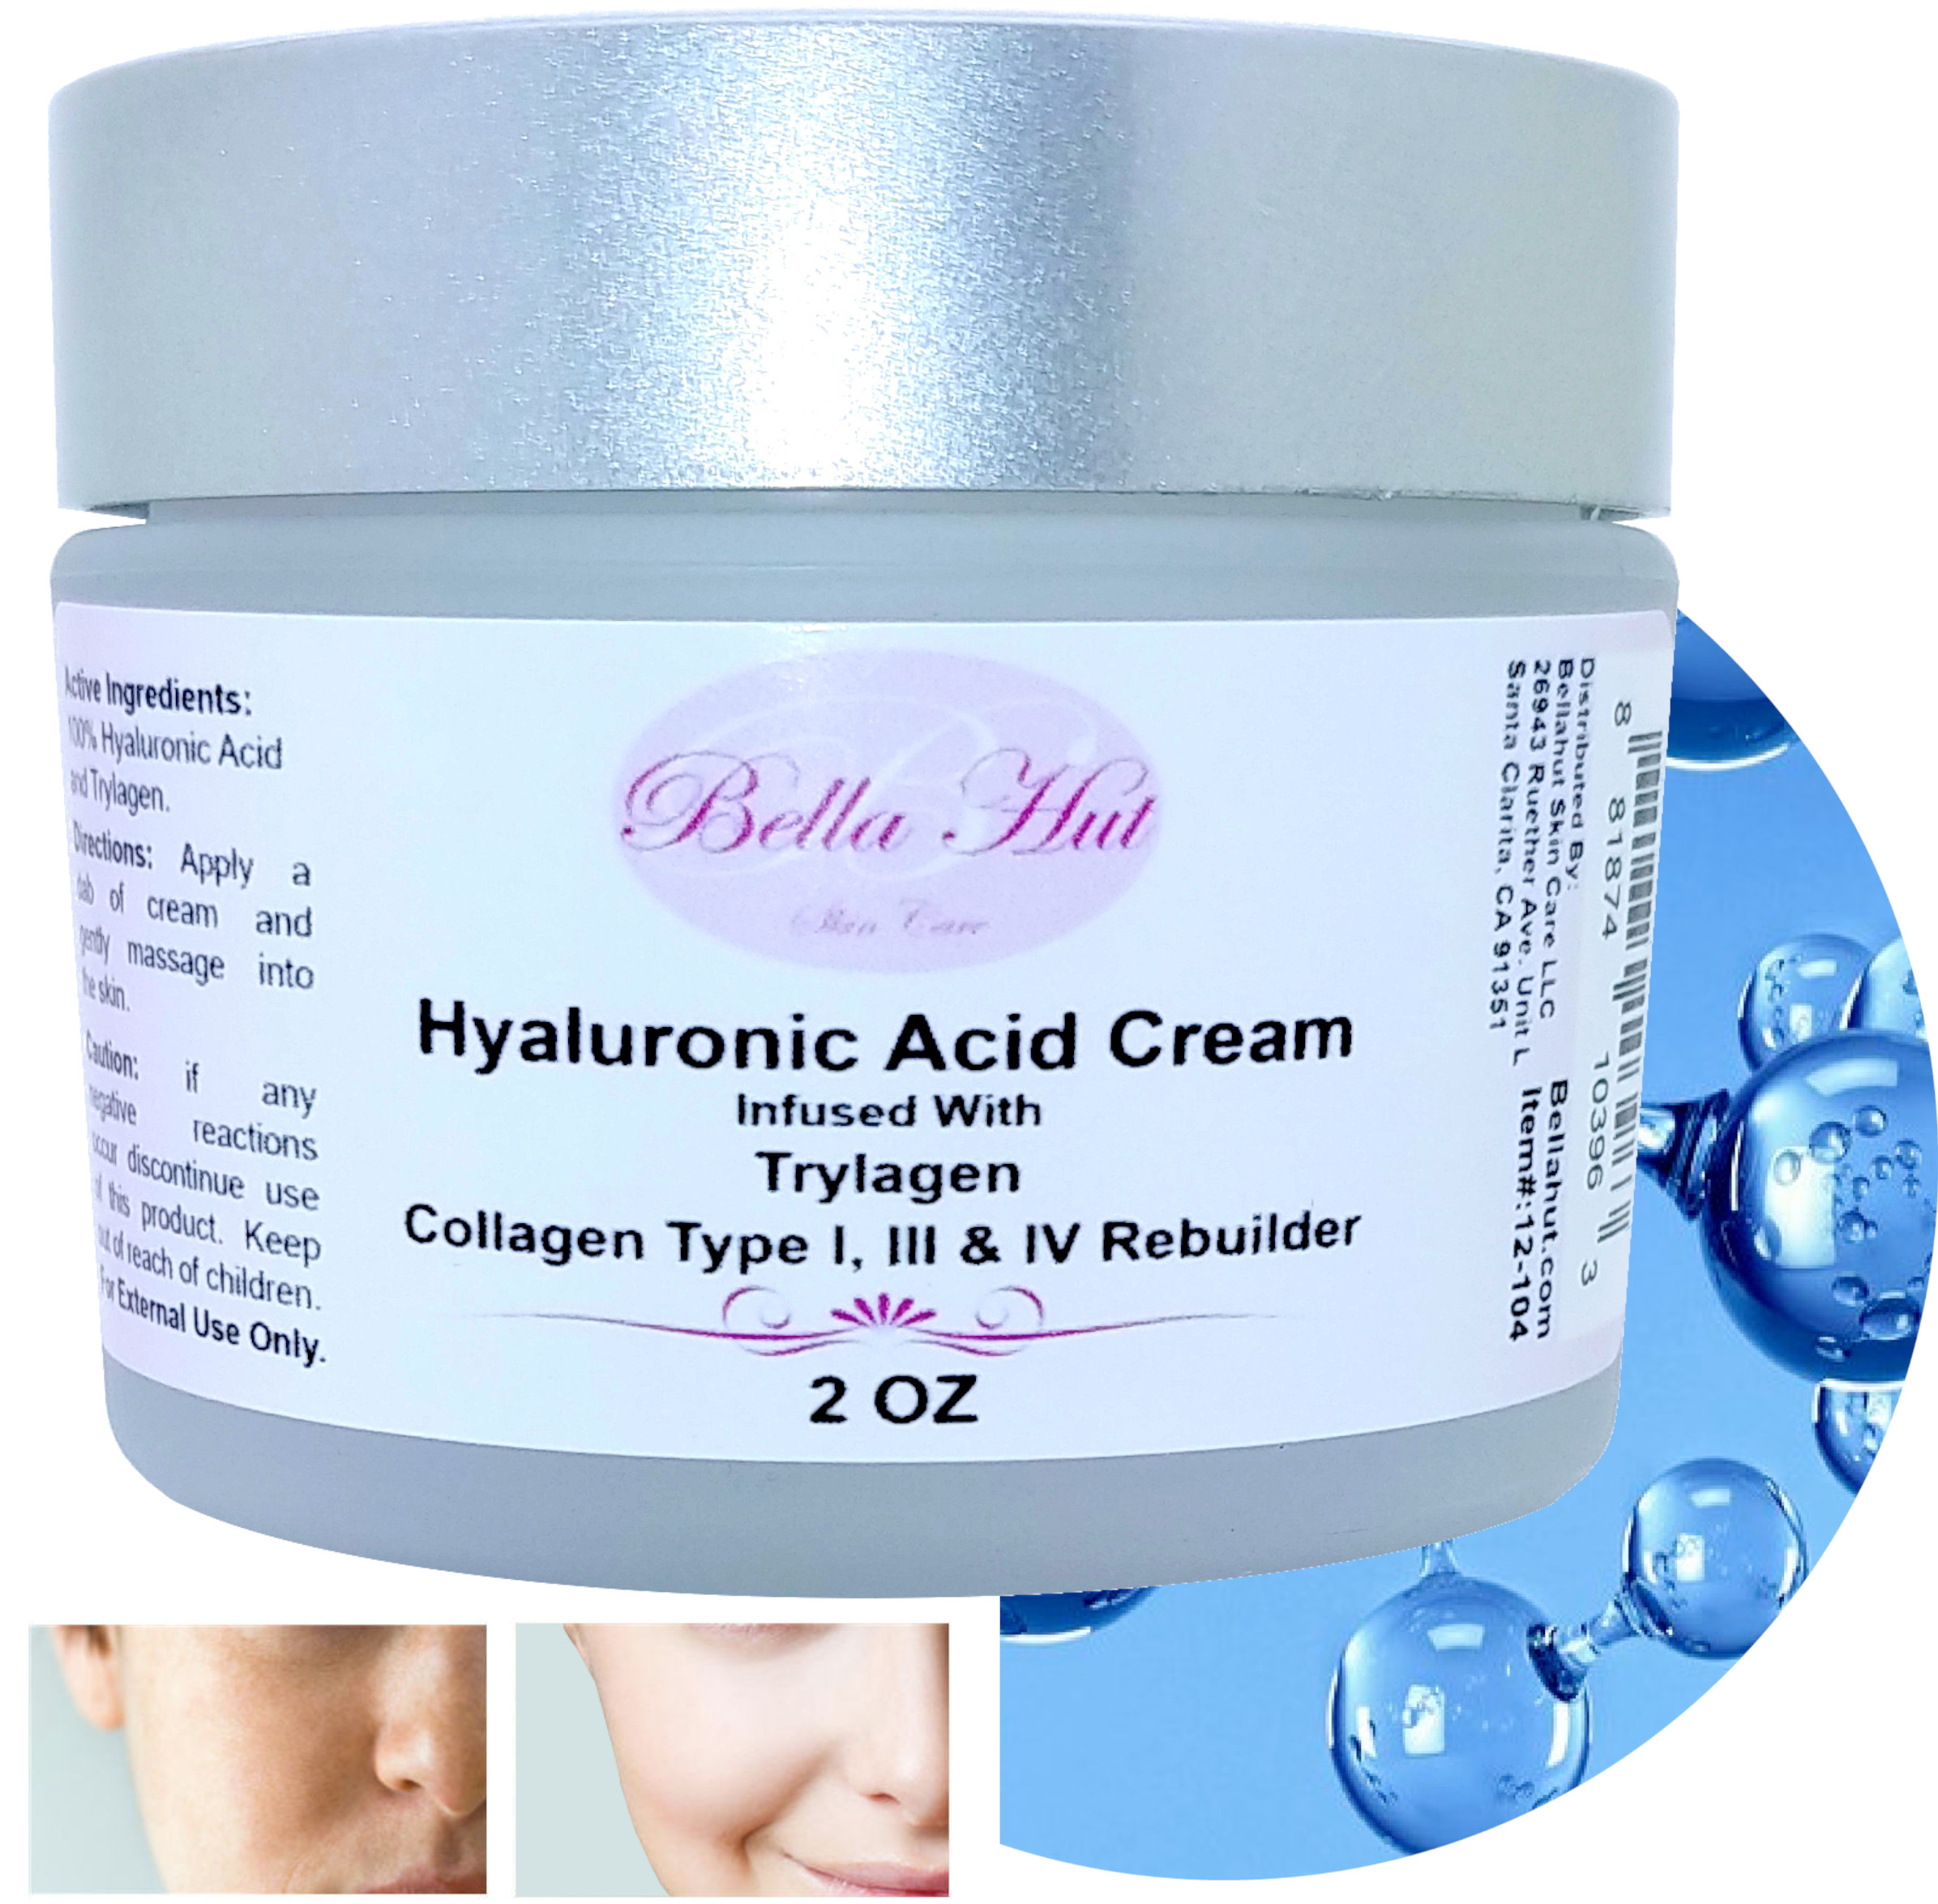 HYALURONIC ACID CREAM with Trylagen